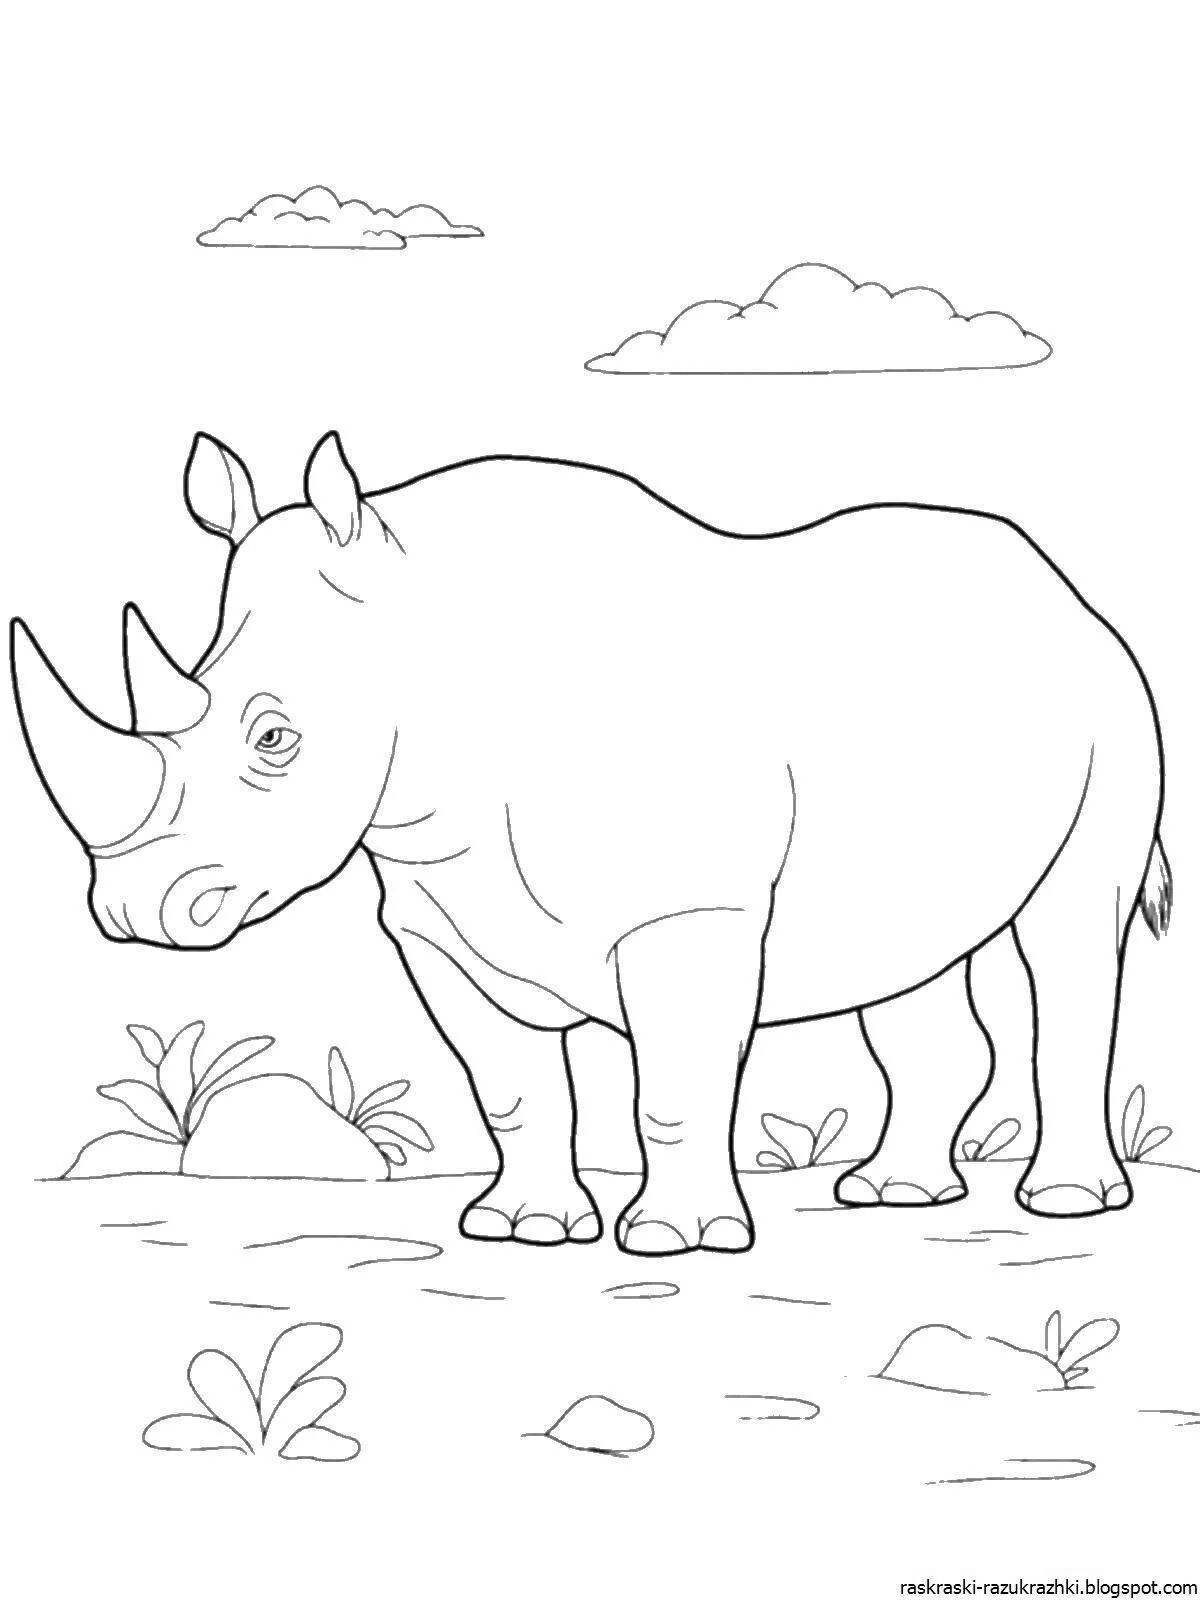 Fun coloring book of African animals for 4-5 year olds